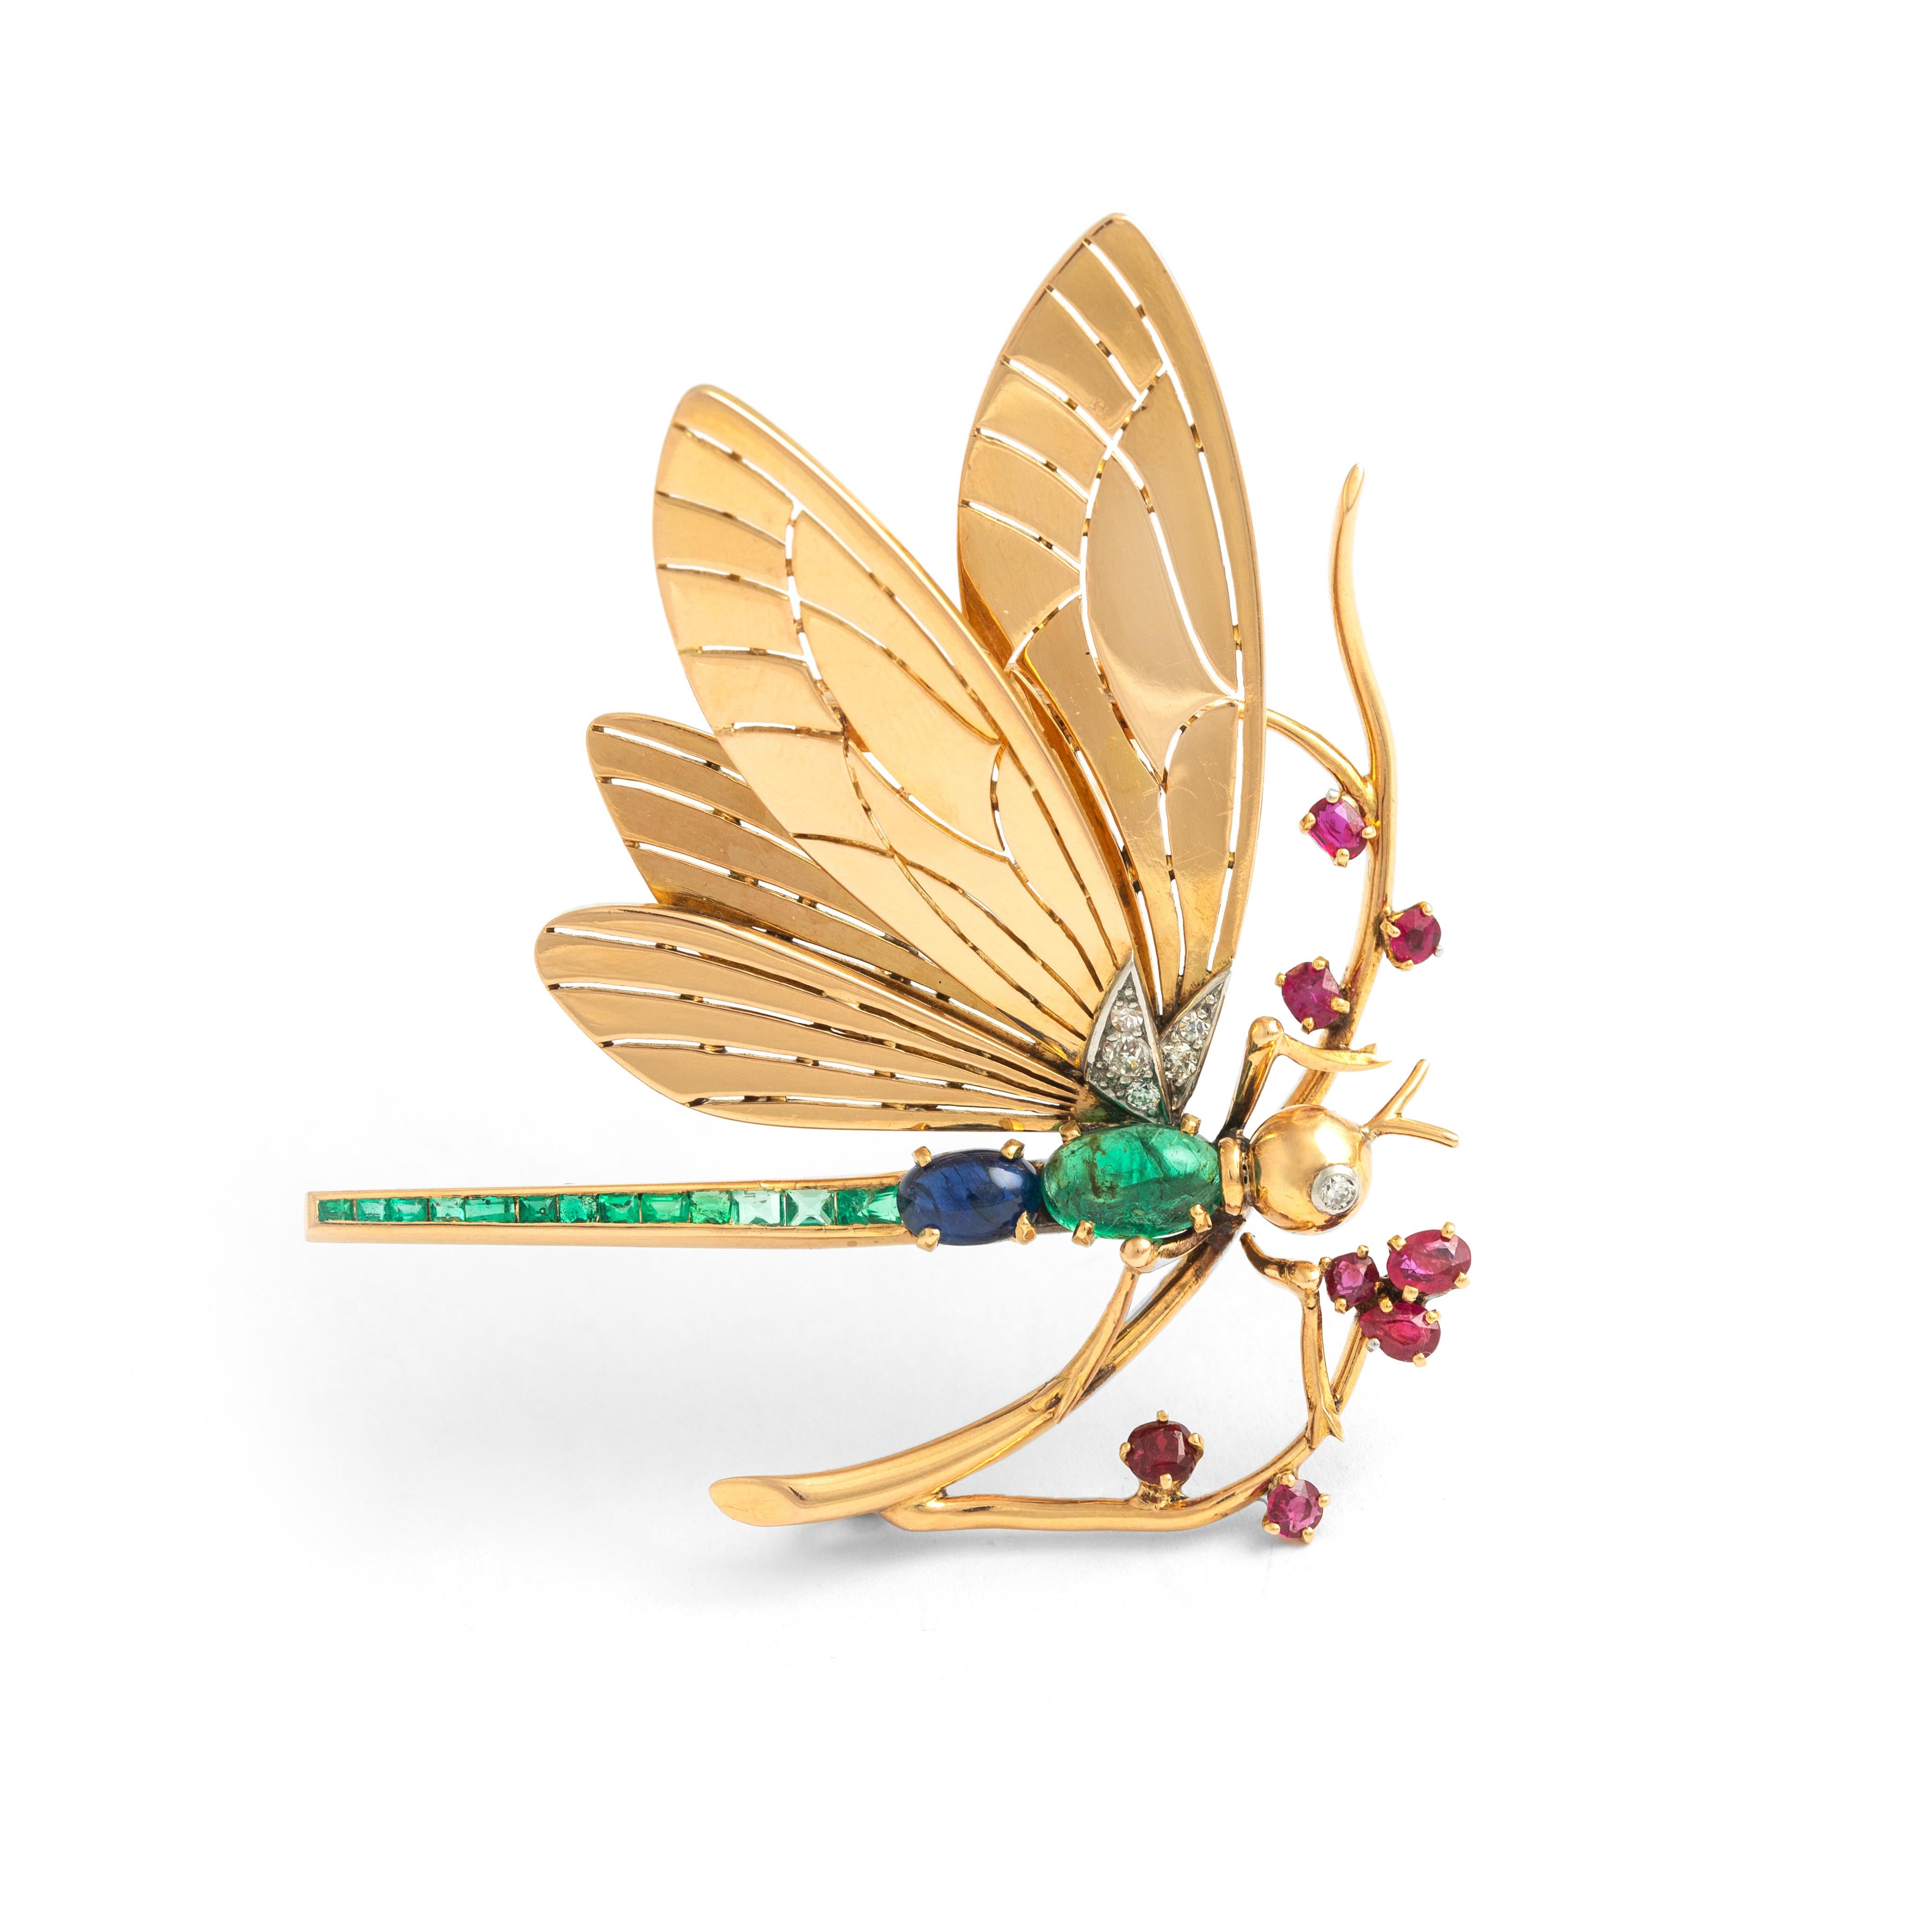 Mauboussin Dragonfly Diamond Emerald Ruby Sapphire Yellow Gold 18K Brooch.
Circa 1940.
Signed Mauboussin.

Dimensions:
Length: 5.10 centimeters.
Height: 7.20 centimeters.
Thickness: approx. 1.50 centimeters.

Weight: 22.88 grams

